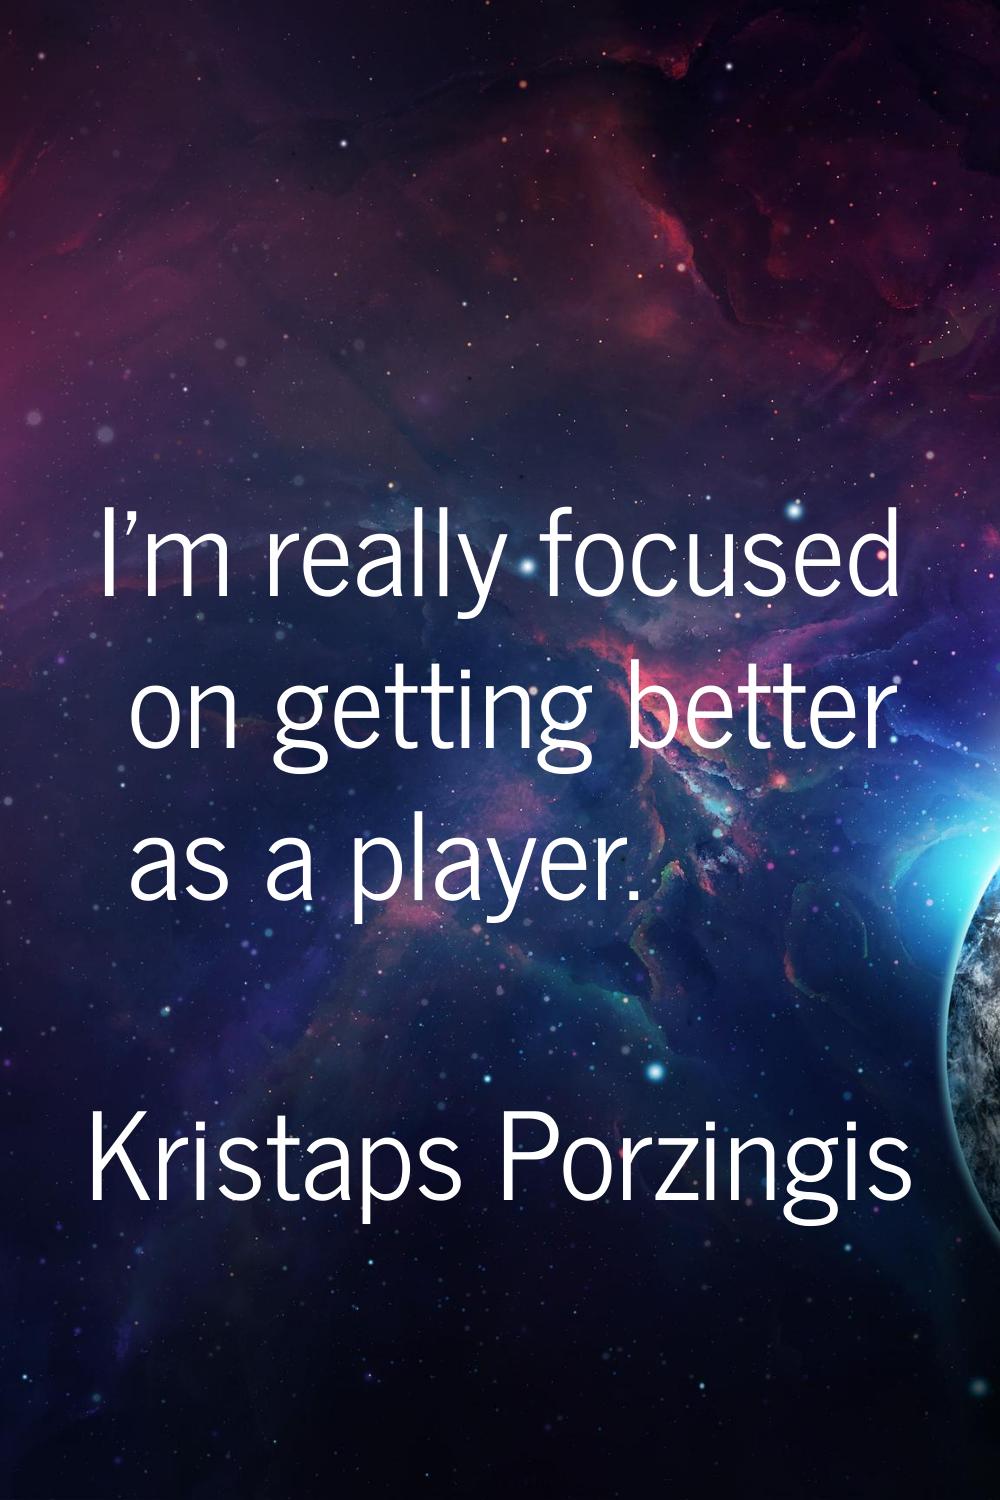 I'm really focused on getting better as a player.